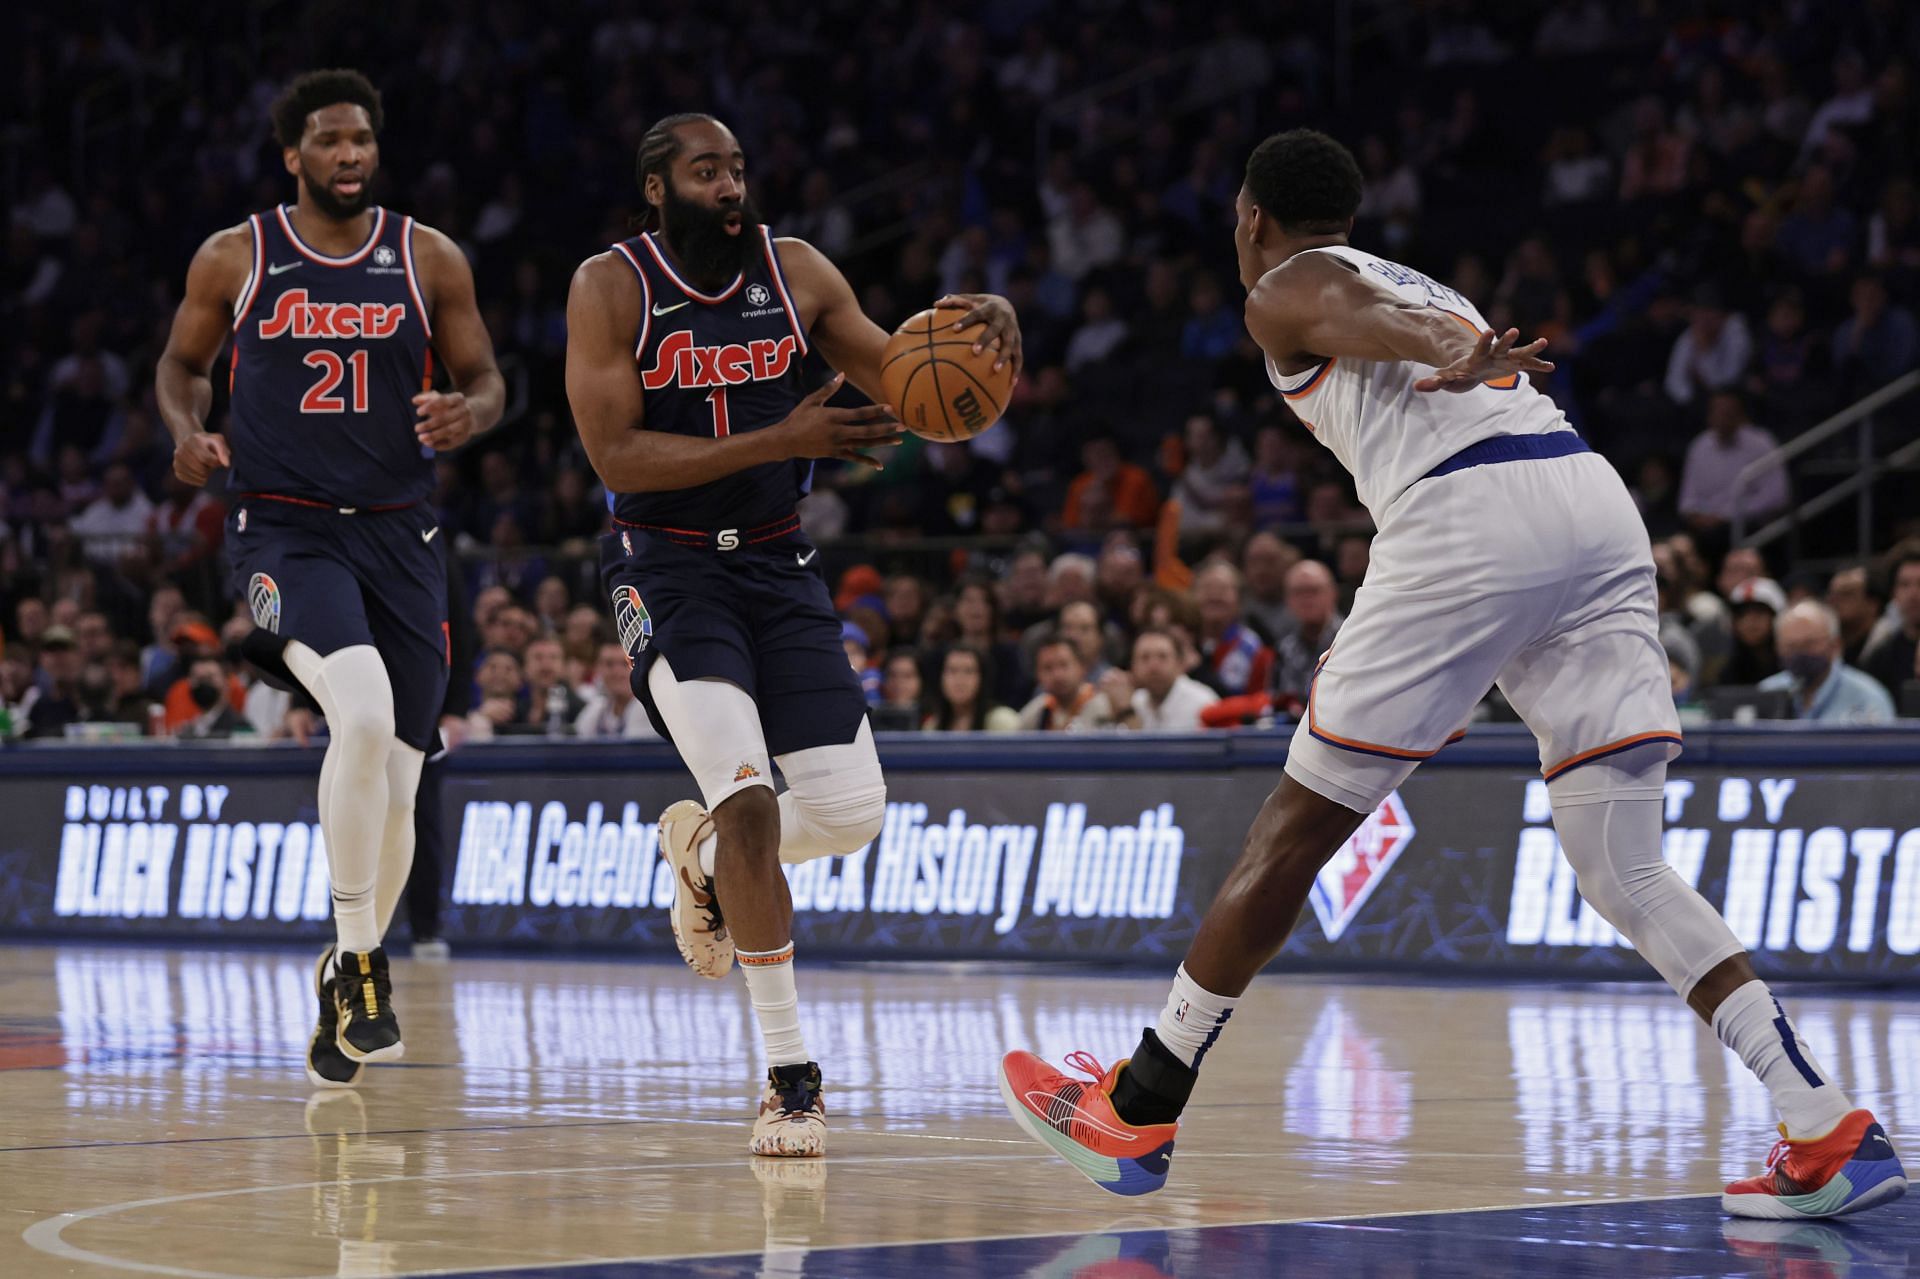 James Harden #1 of the Philadelphia 76ers passes the ball back to Joel Embiid #21 of the Philadelphia 76ers in front of RJ Barrett #9 of the New York Knicks during the first half at Madison Square Garden on February 27, 2022 in New York City